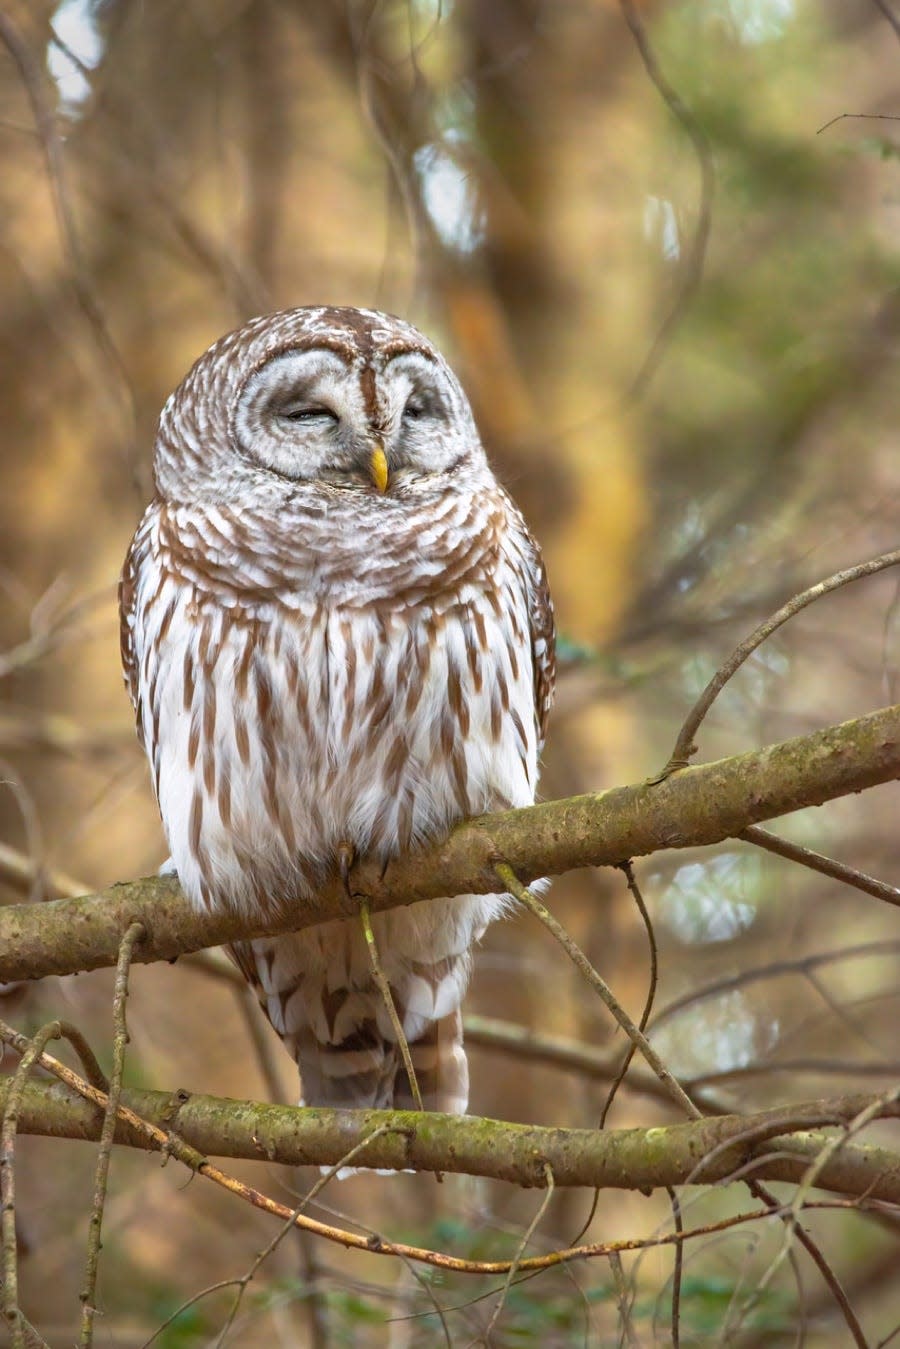 The barred owl, known for its call that sounds like "Who cooks for you?"